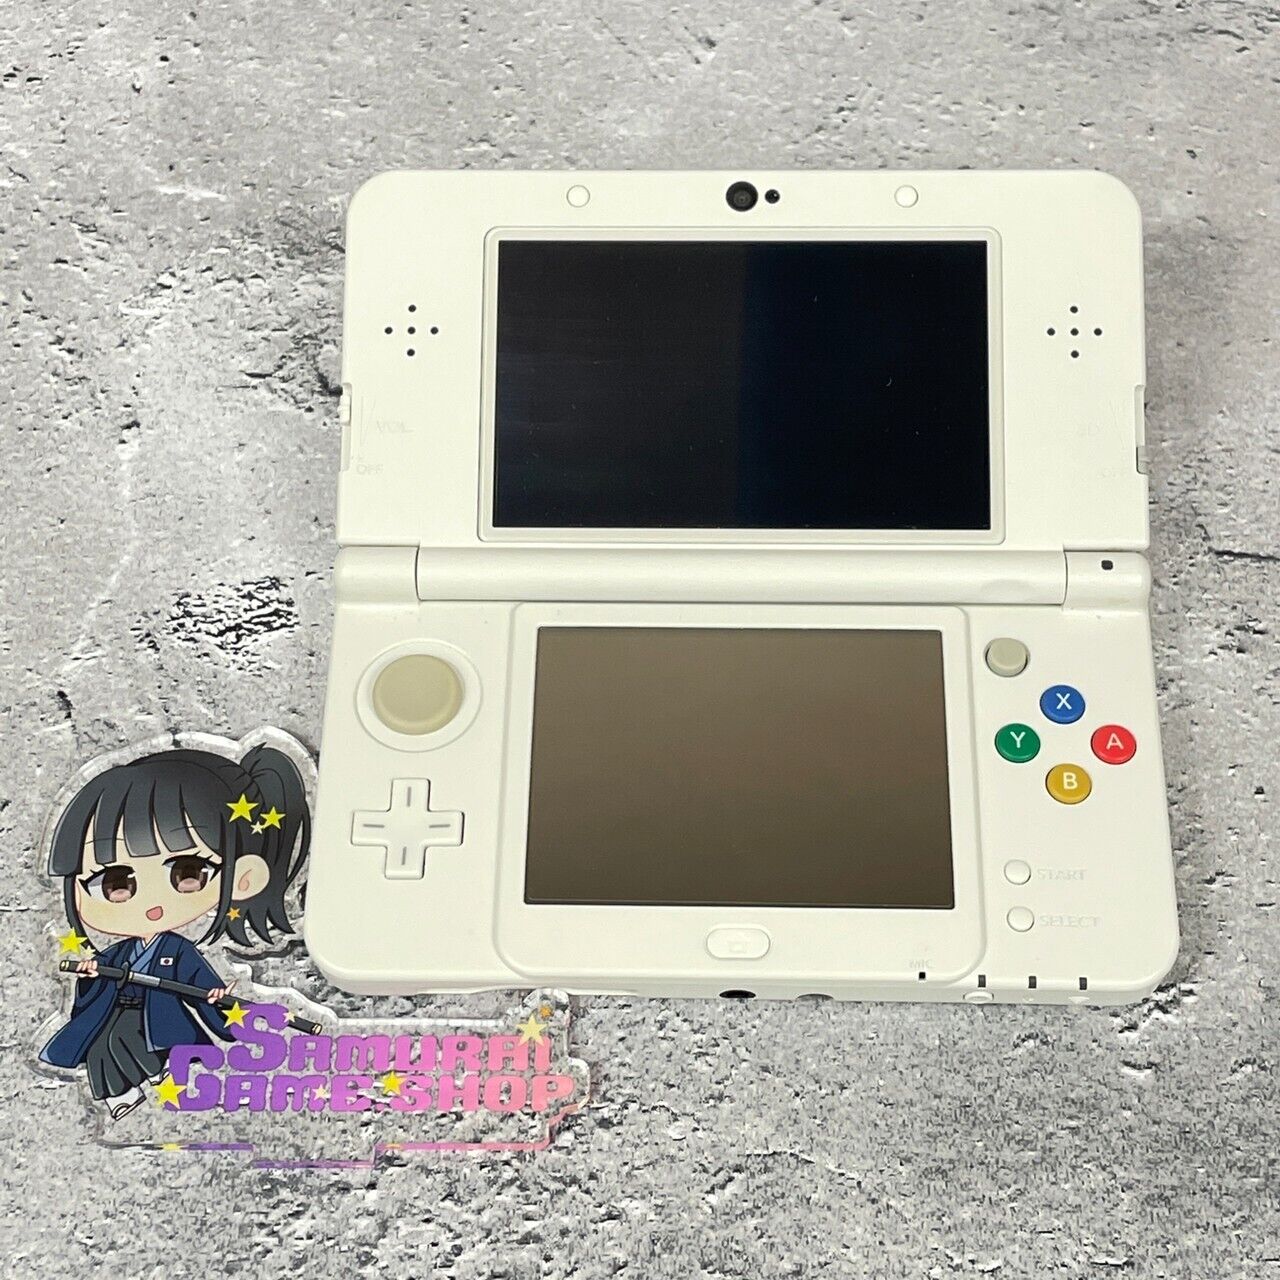 Nintendo new 3DS Console Only Black or White Used Good Japanese Language Edition